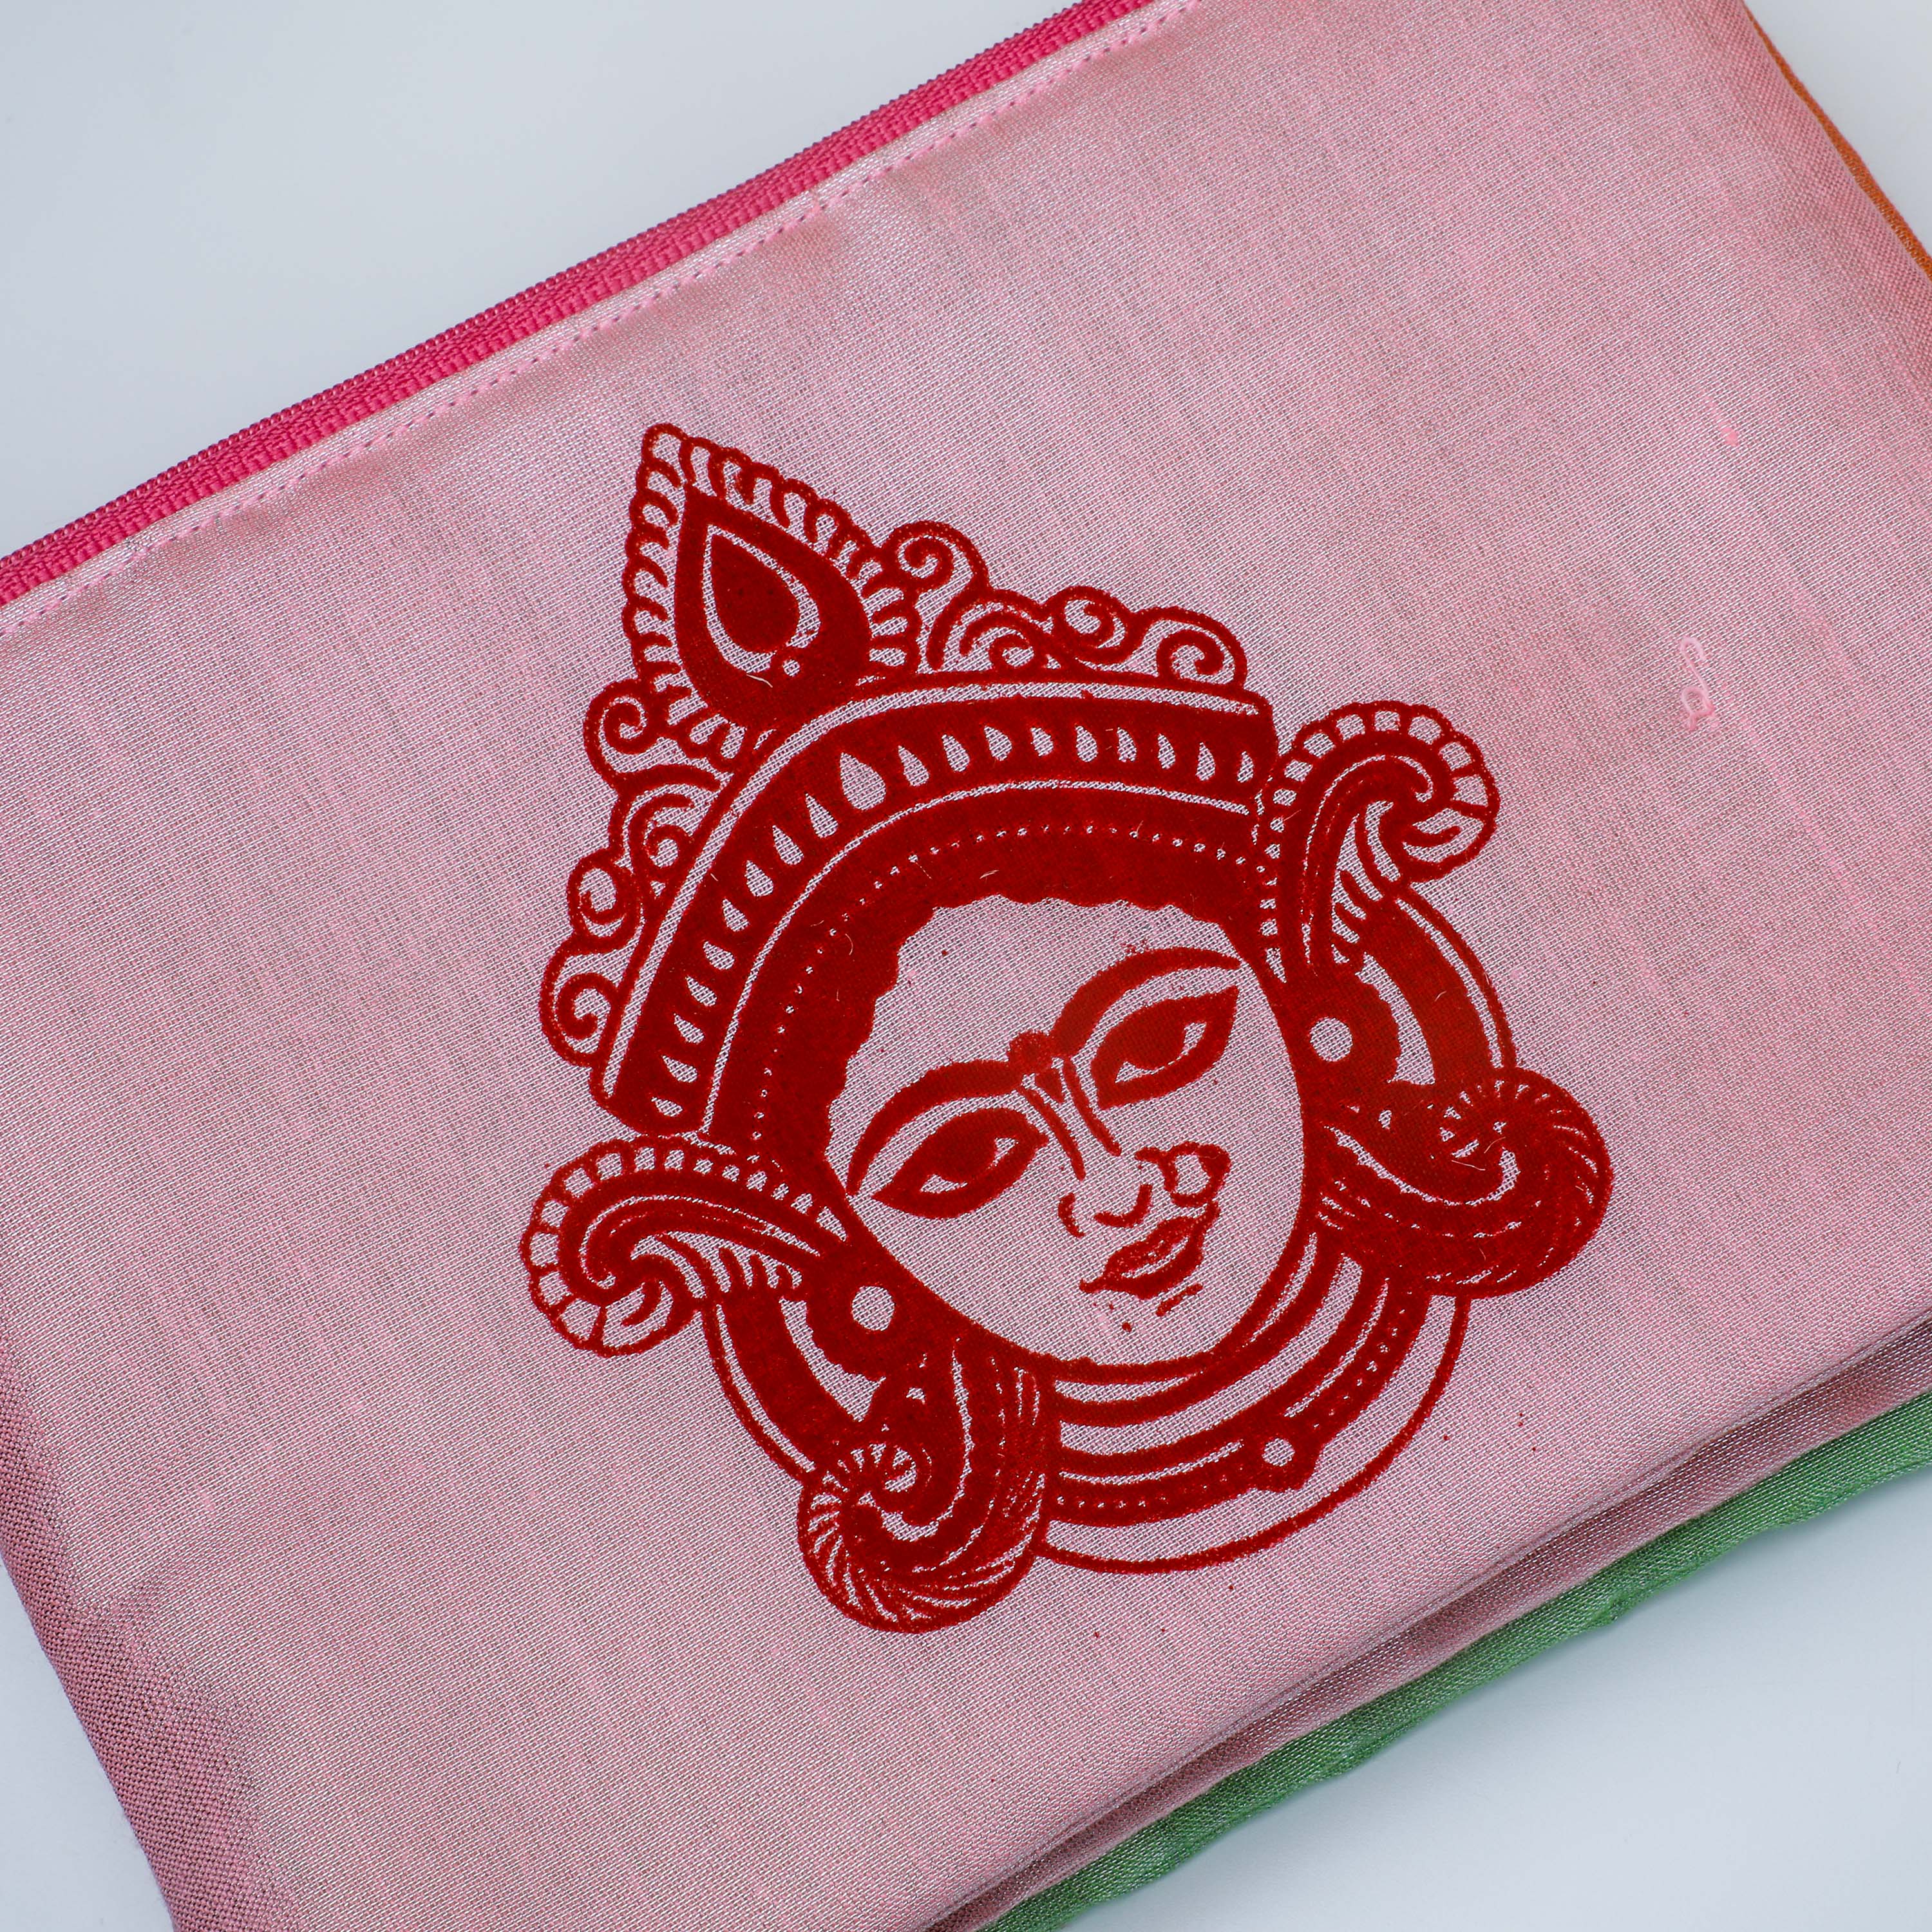  All of our handbags are skillfully crafted in India